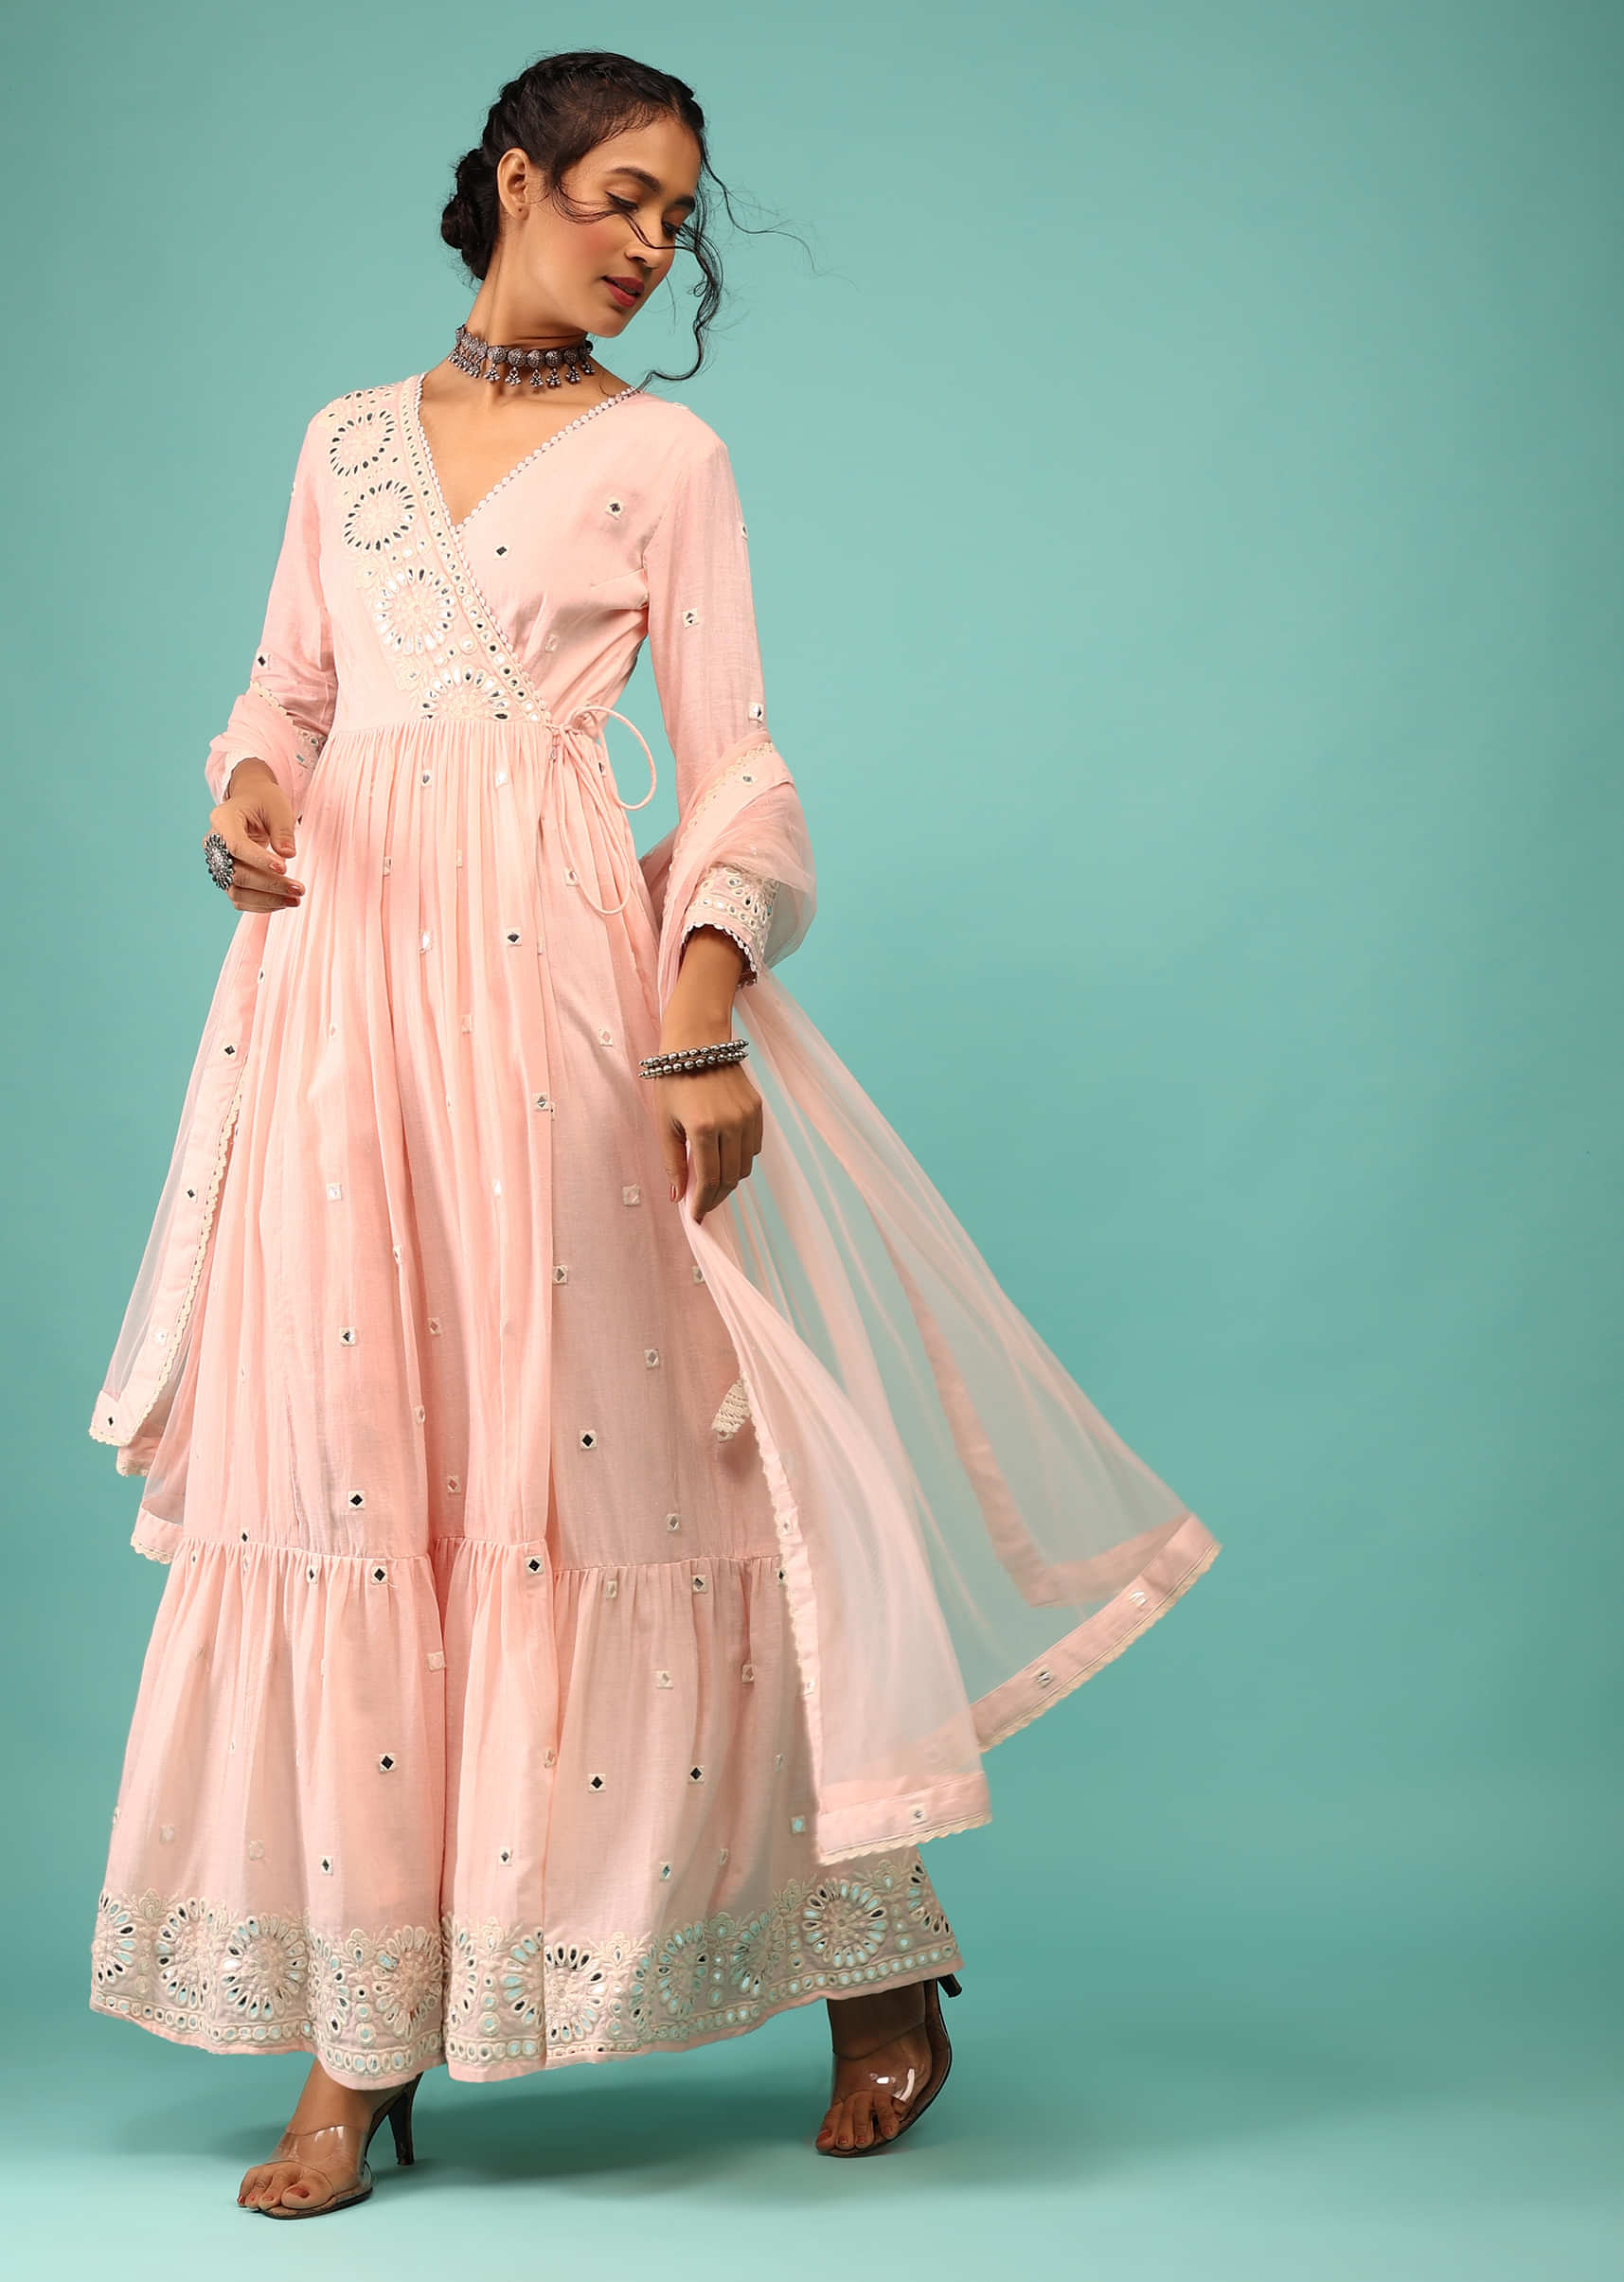 Pearl Pink Anarkali Kurta In Floral Lucknowi Embroidery With Angrakha Pattern & Surplice Neckline